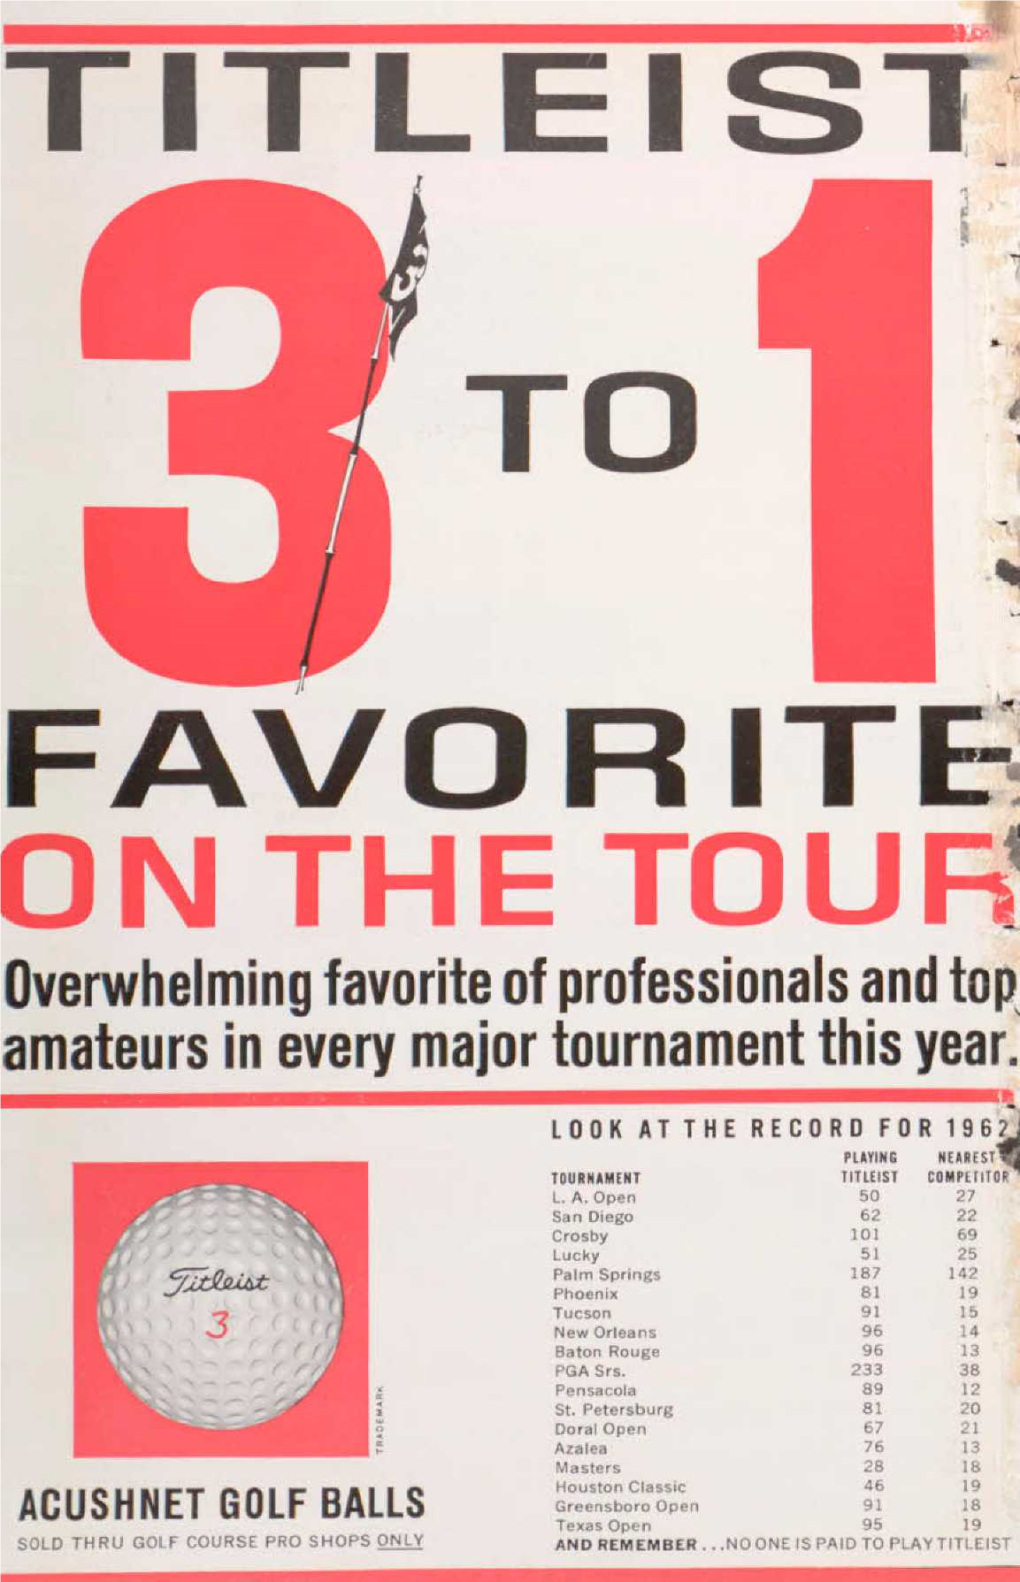 FAVORITE- on the TOUR Overwhelming Favorite of Professionals and Top Amateurs in Every Major Tournament This Year